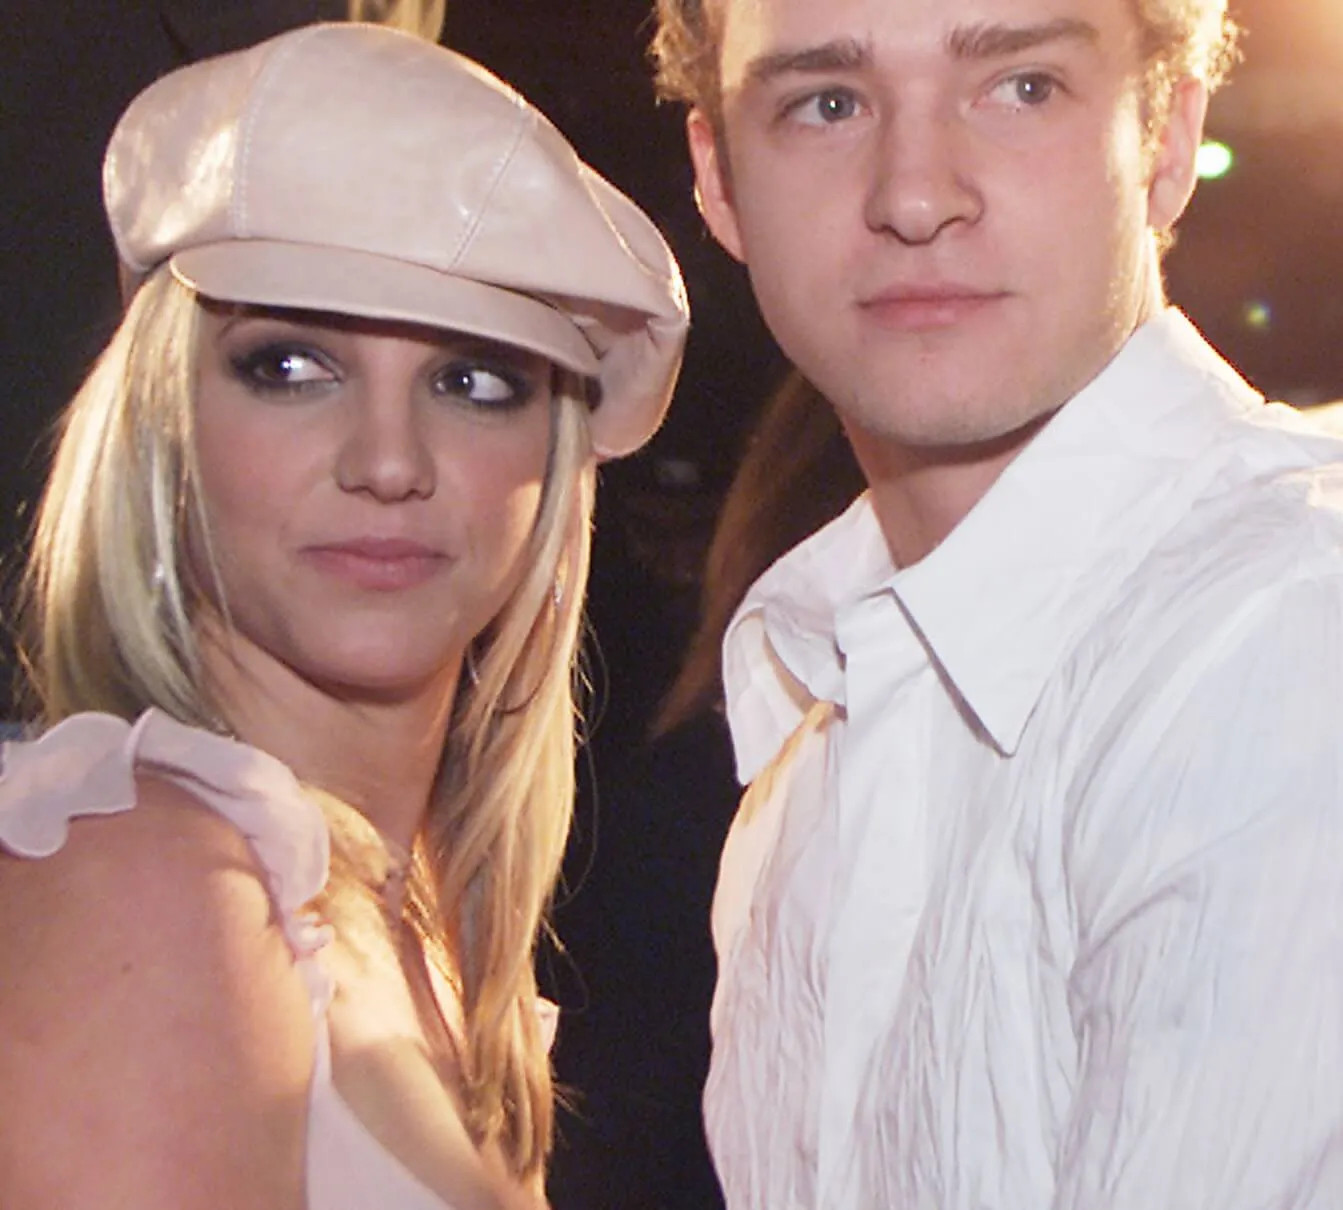 Britney Spears and Justin Timberlake wearing white